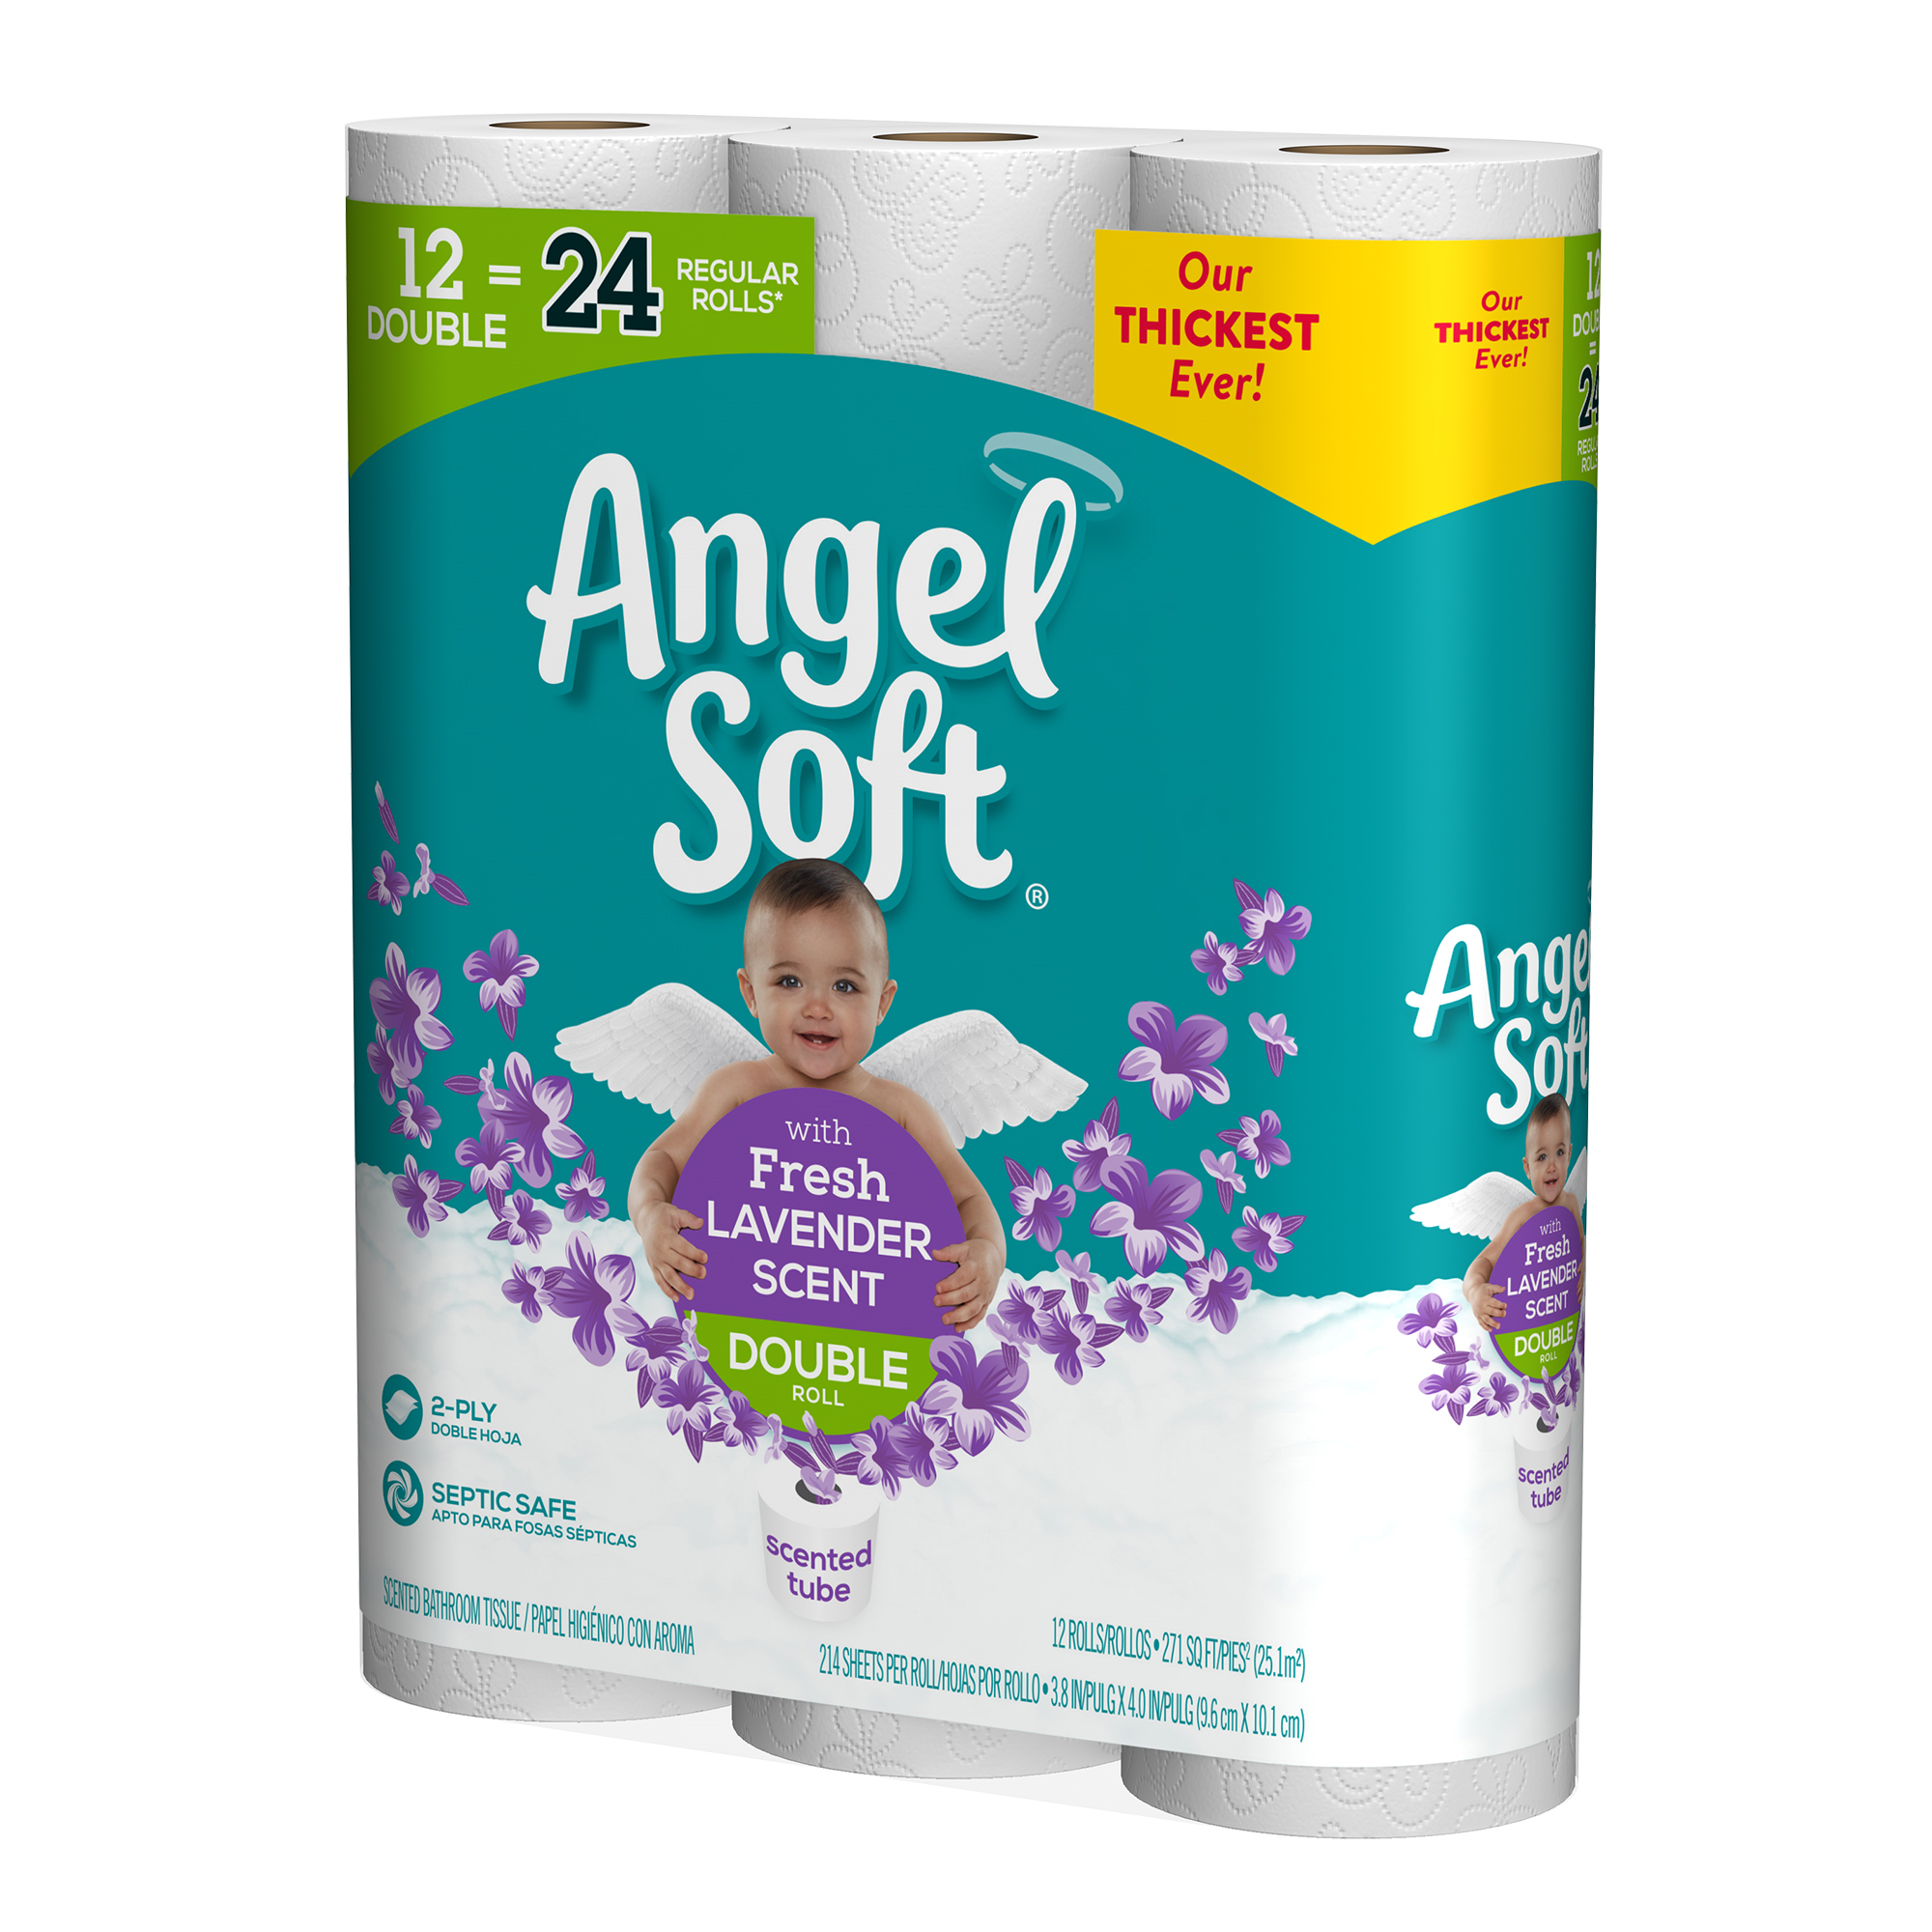 Angel Soft Toilet Paper with Fresh Lavender Scent, 12 Double Rolls - image 4 of 8